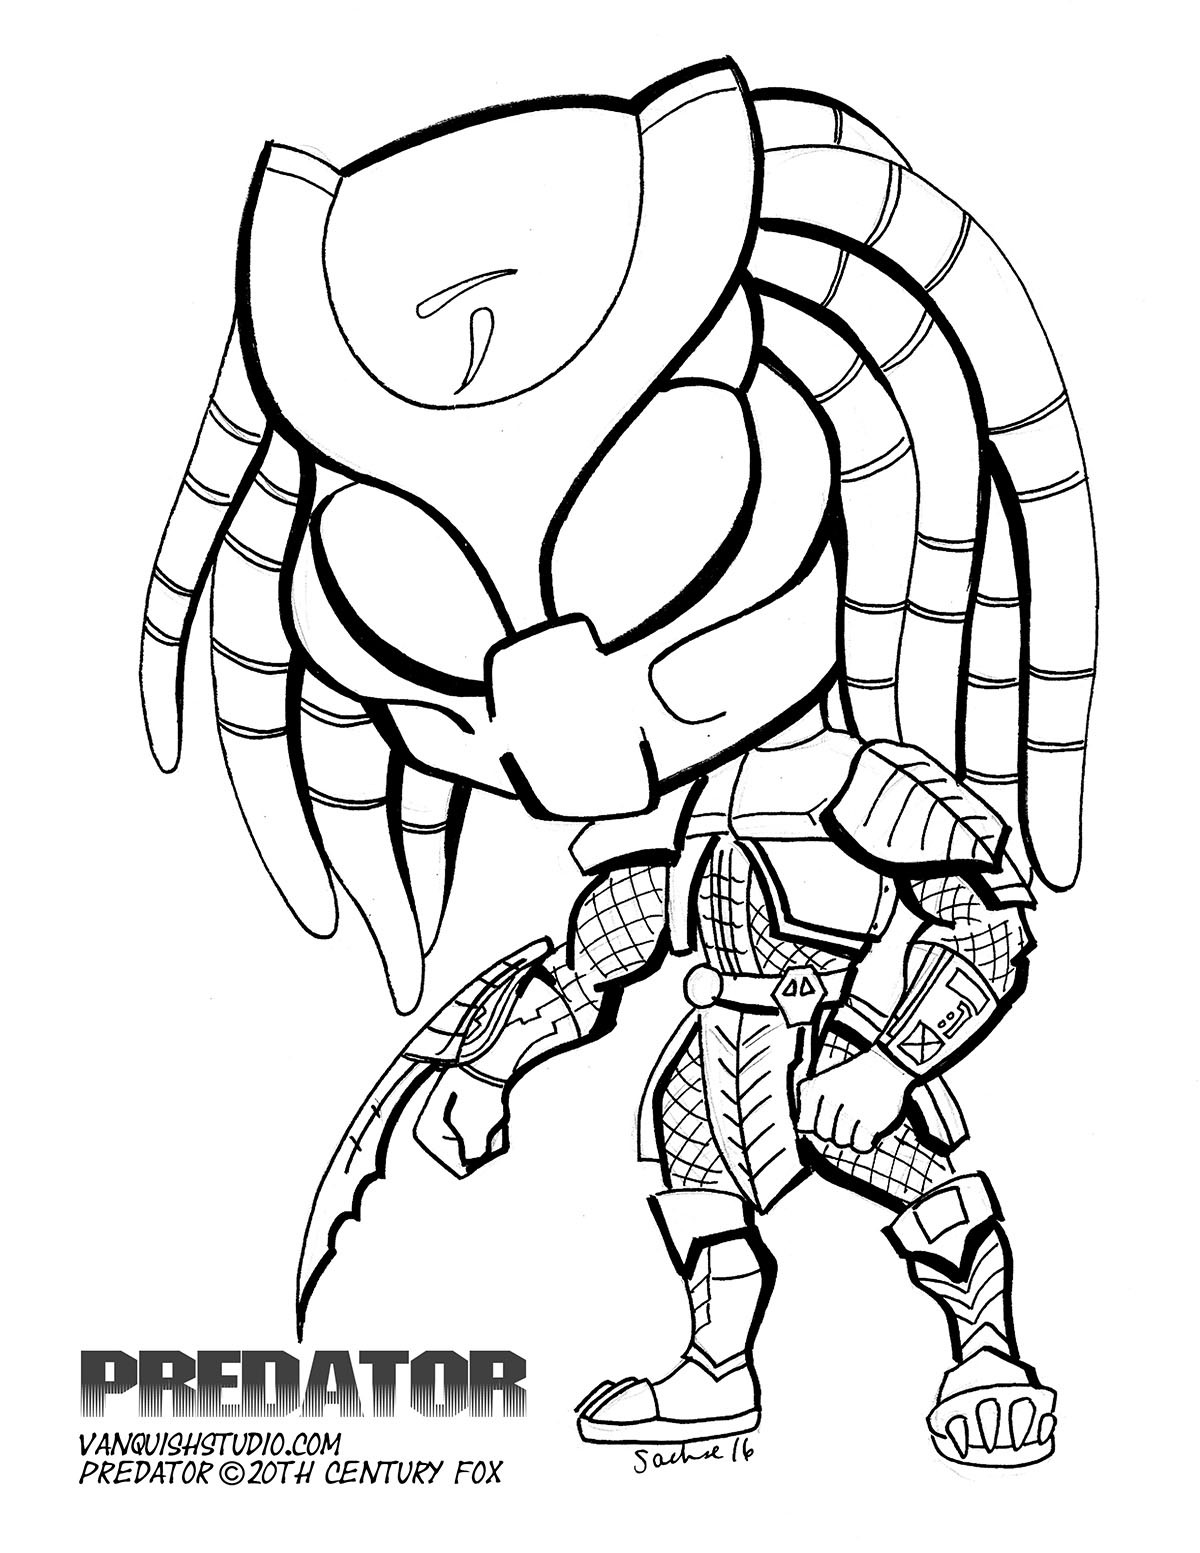 Predator Coloring Pages Free Printable Coloring Pages for Kids